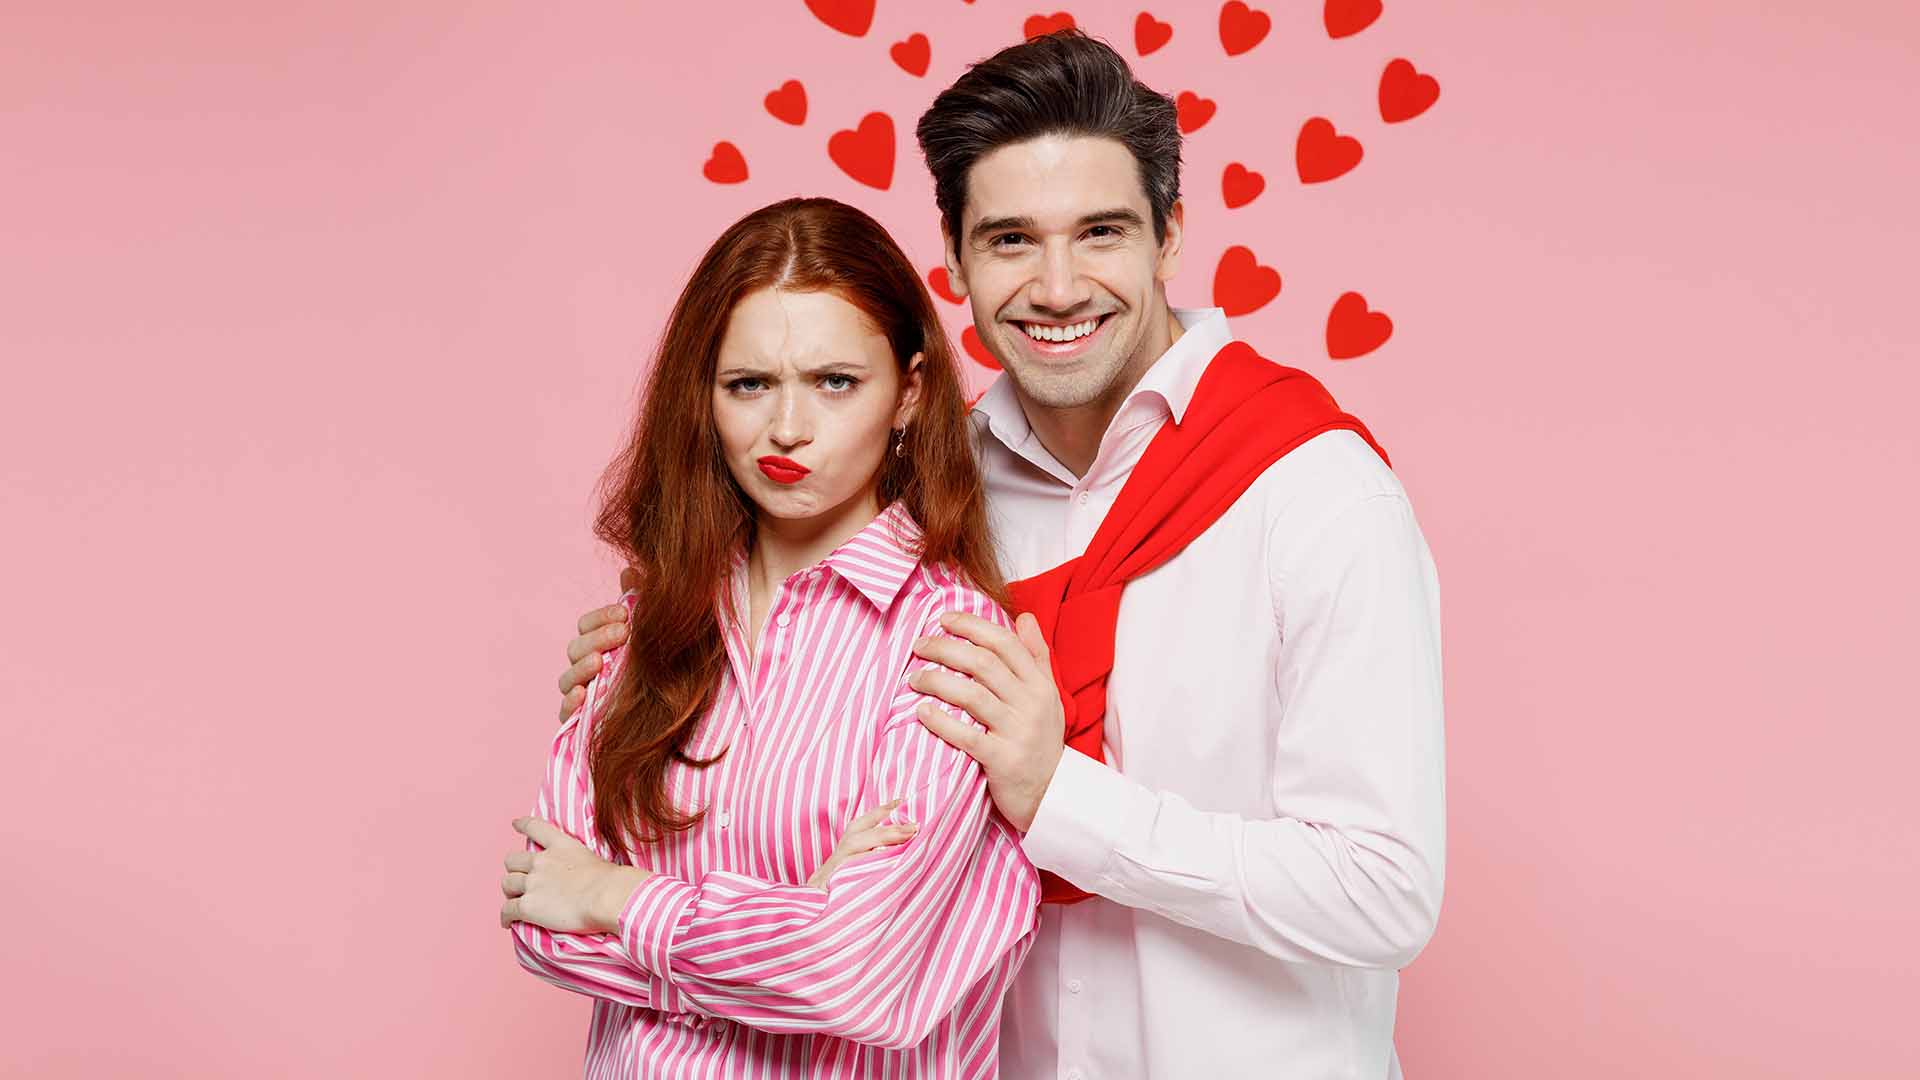 Red-haired woman and brunette man standing close to each other. The woman looks annoyed while the man looks happy.